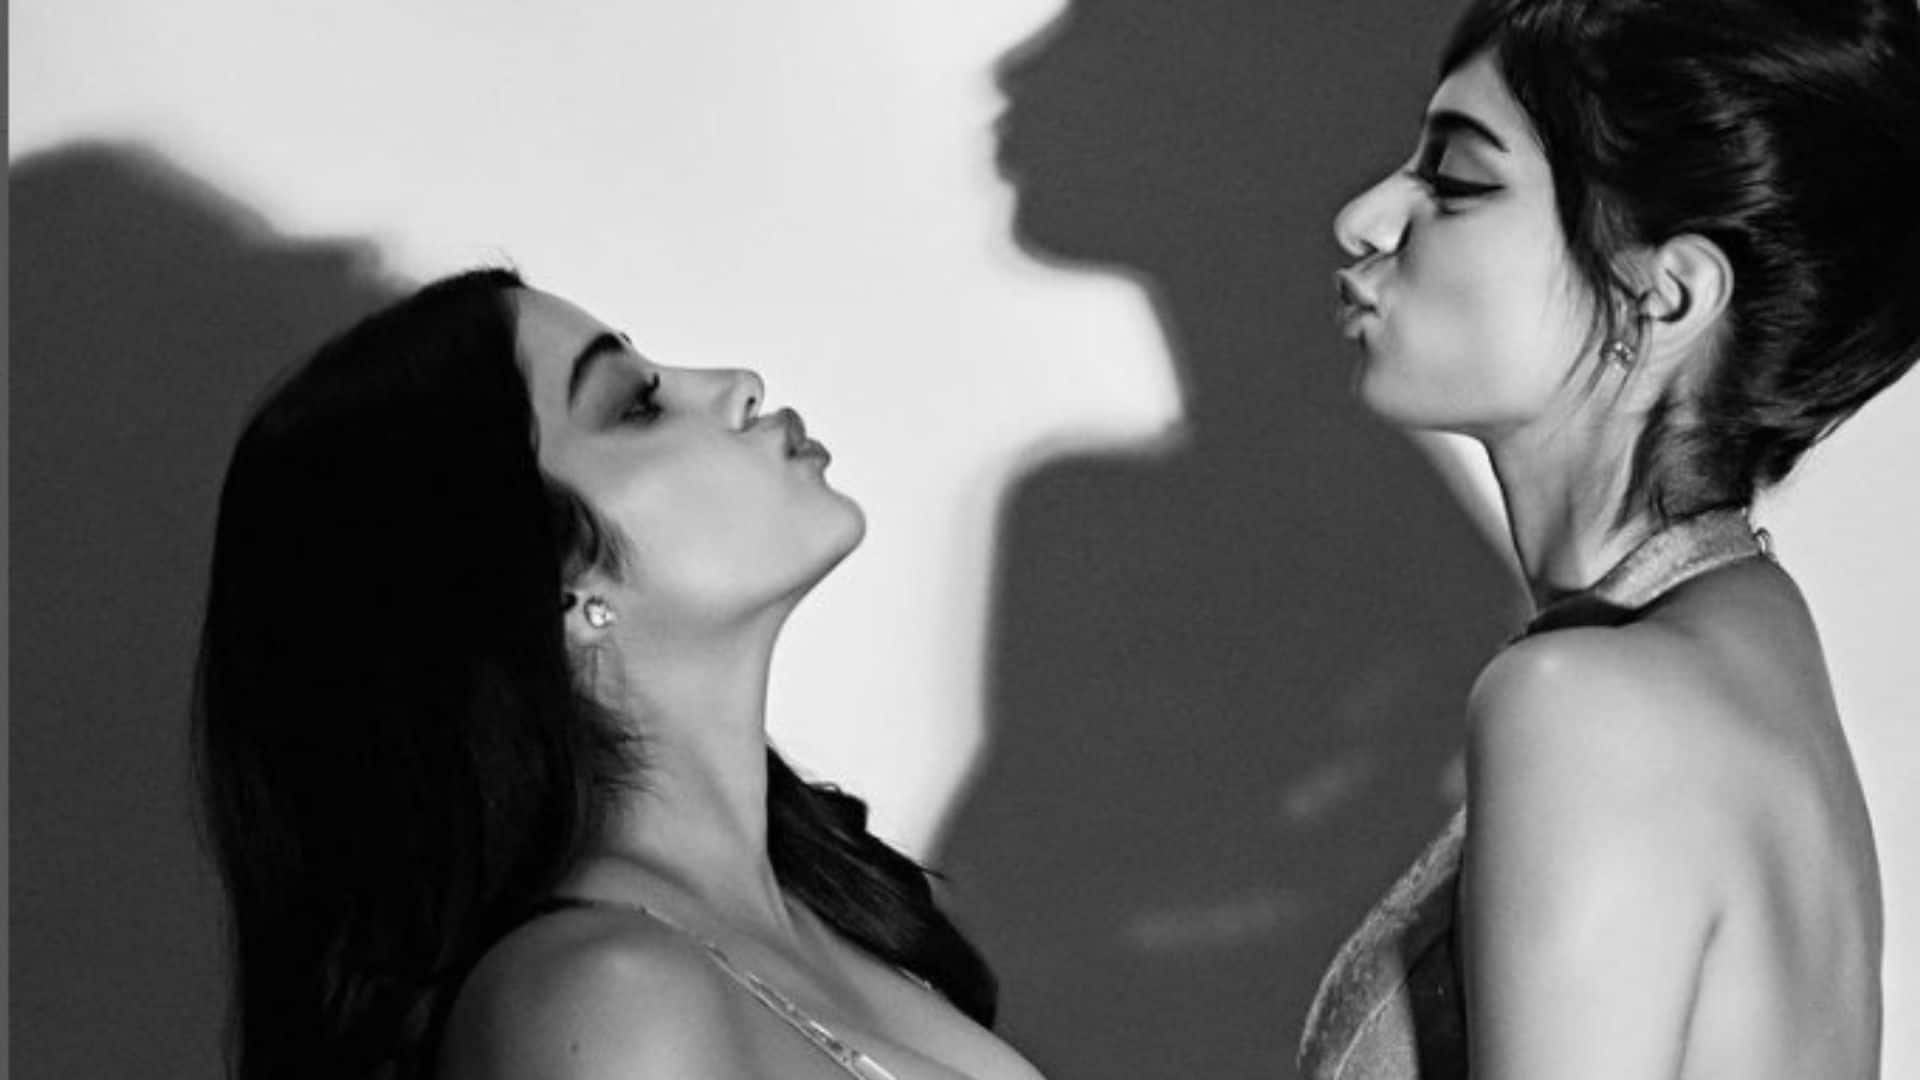 Janhvi Kapoor goes all mushy over sister Khushi in THIS monochrome pic; fans say ‘sibling goals’